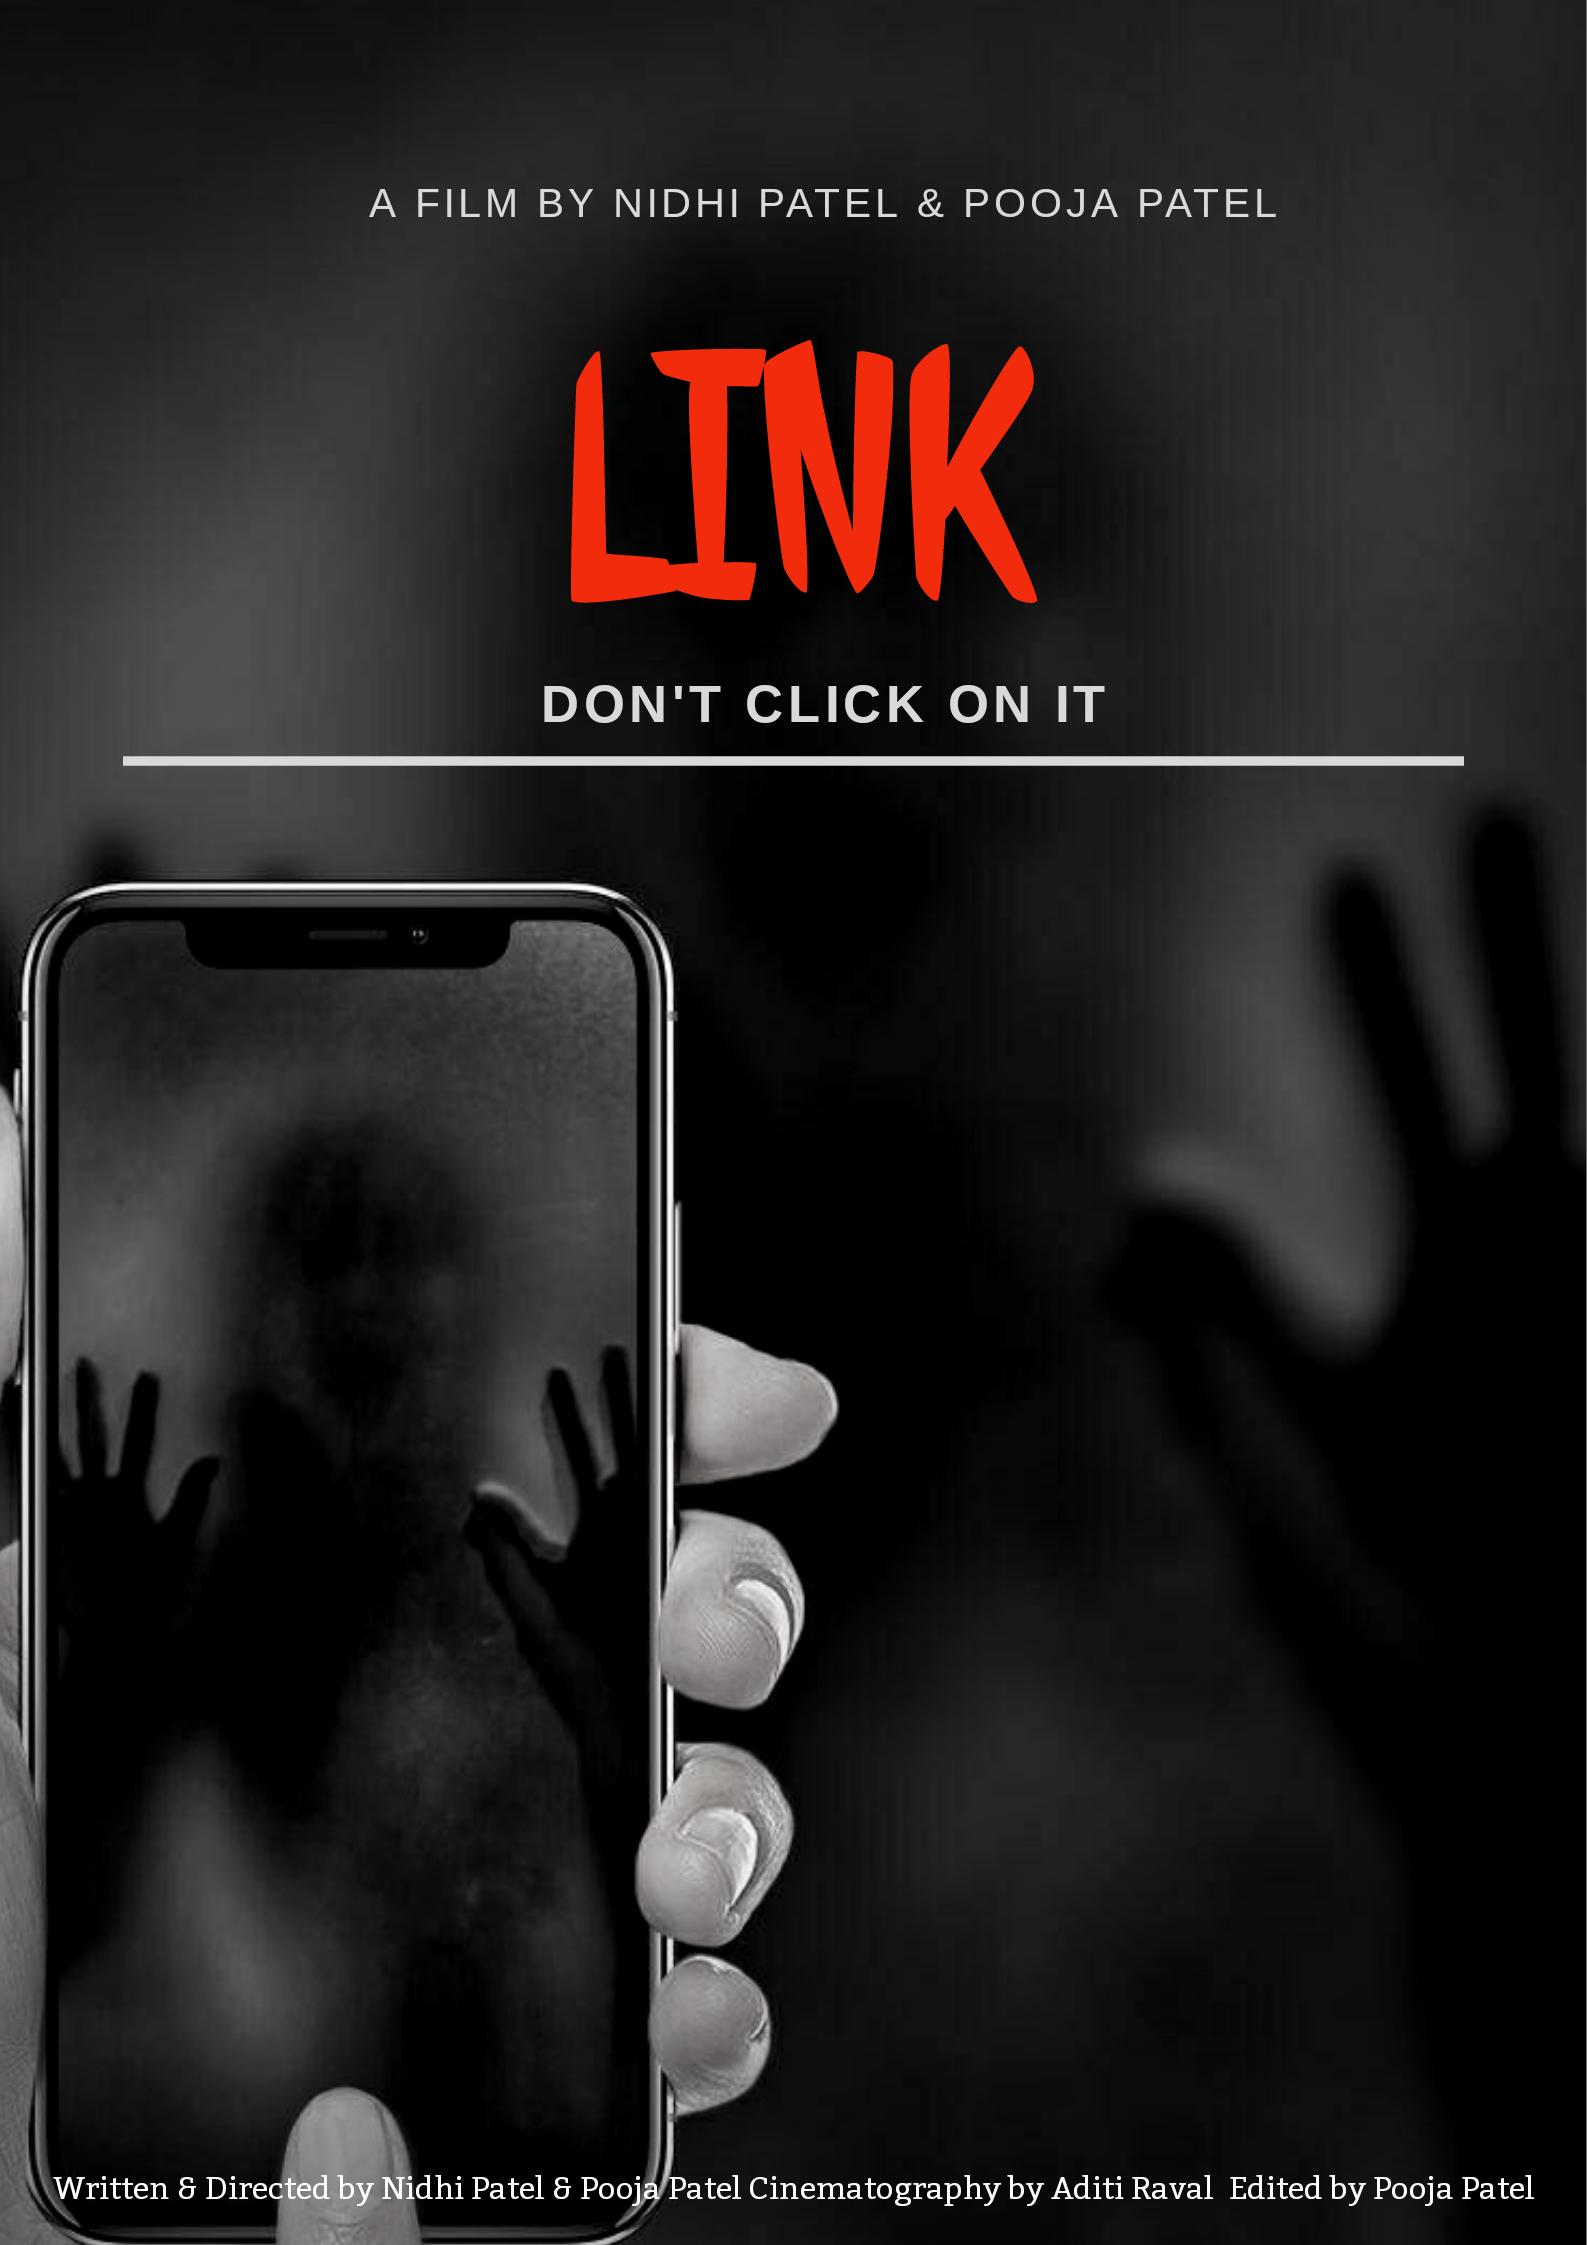 Link-Don't click on it